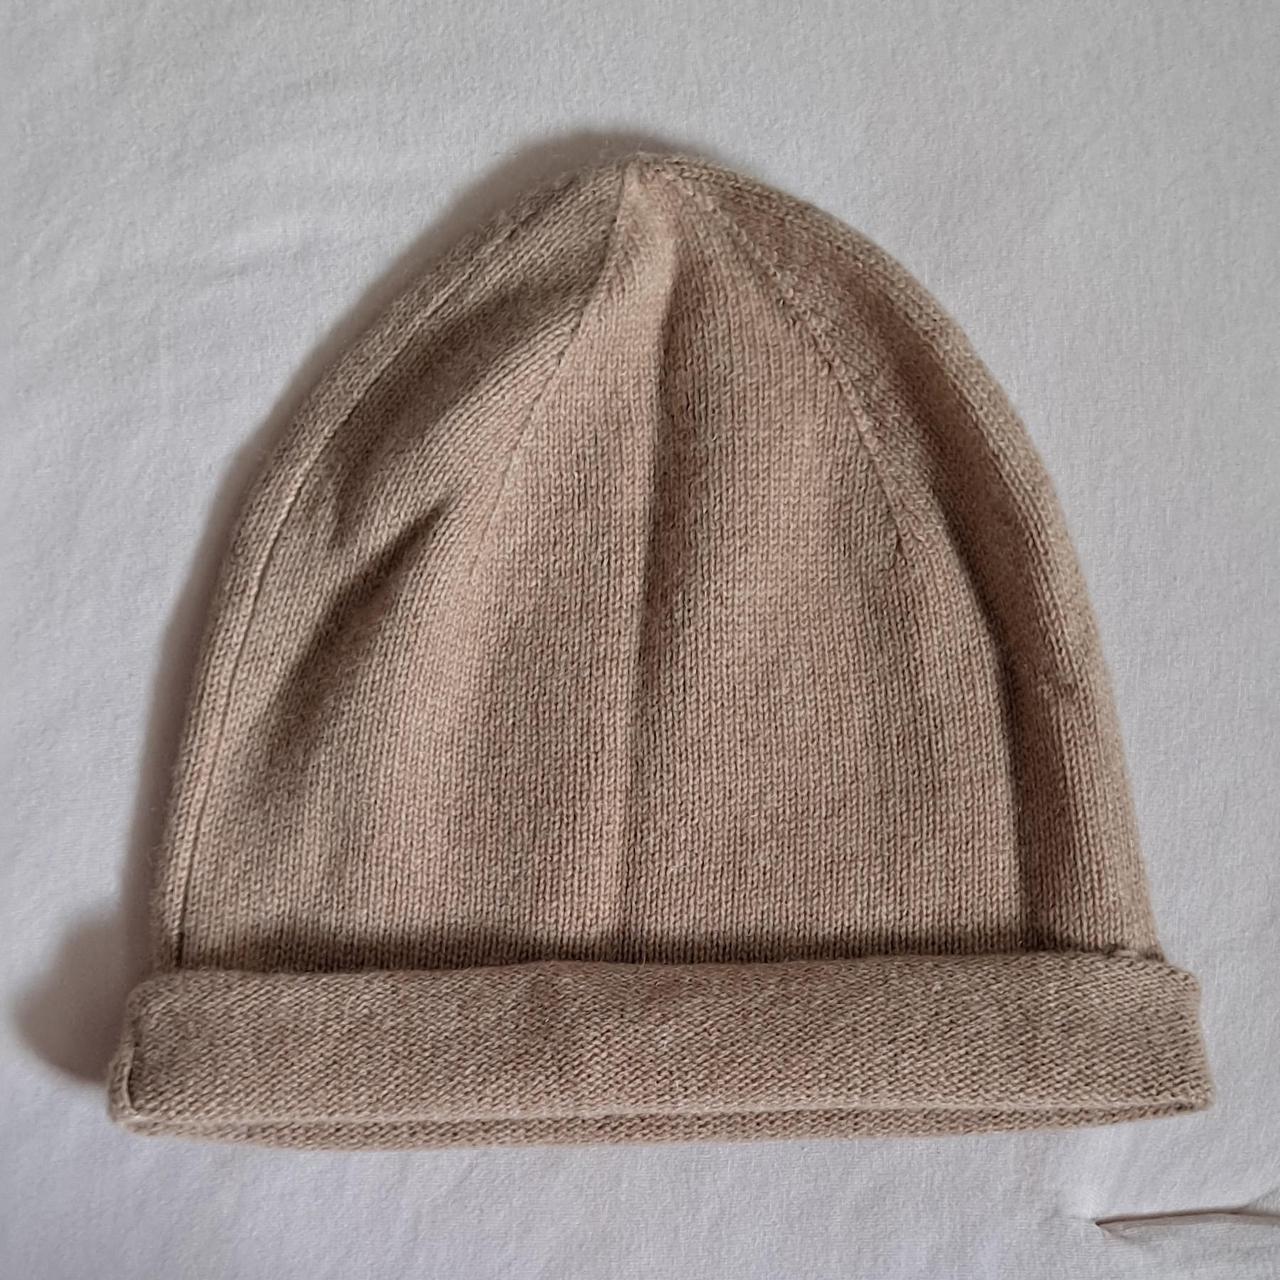 Product Image 1 - Tan lightweight beanie
Brand unknown
No signs